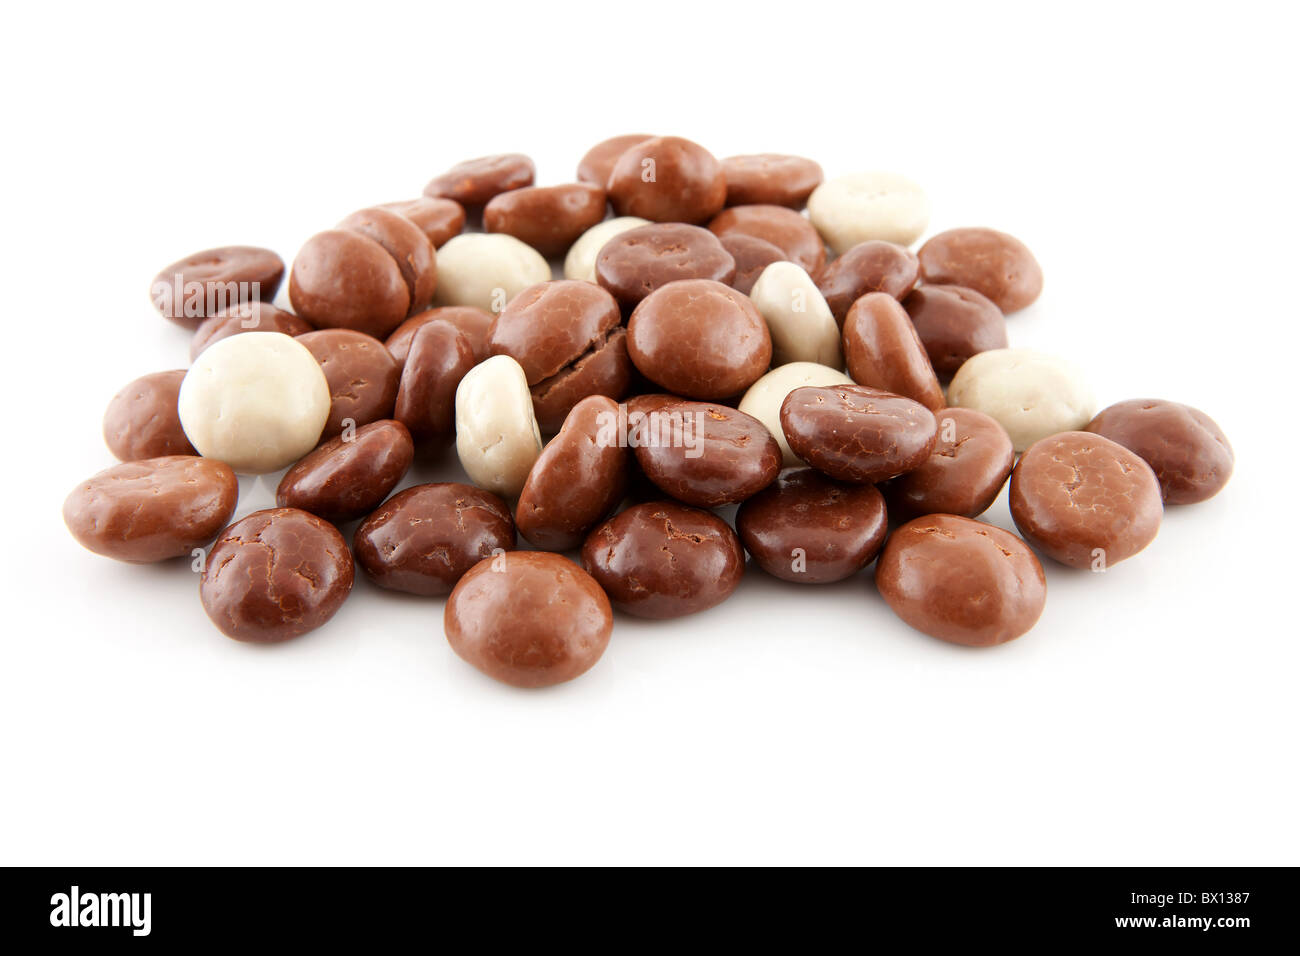 pile of chocolate gingernuts, pepernoten, in closeup. Tyical Dutch candy for 5 december. Stock Photo